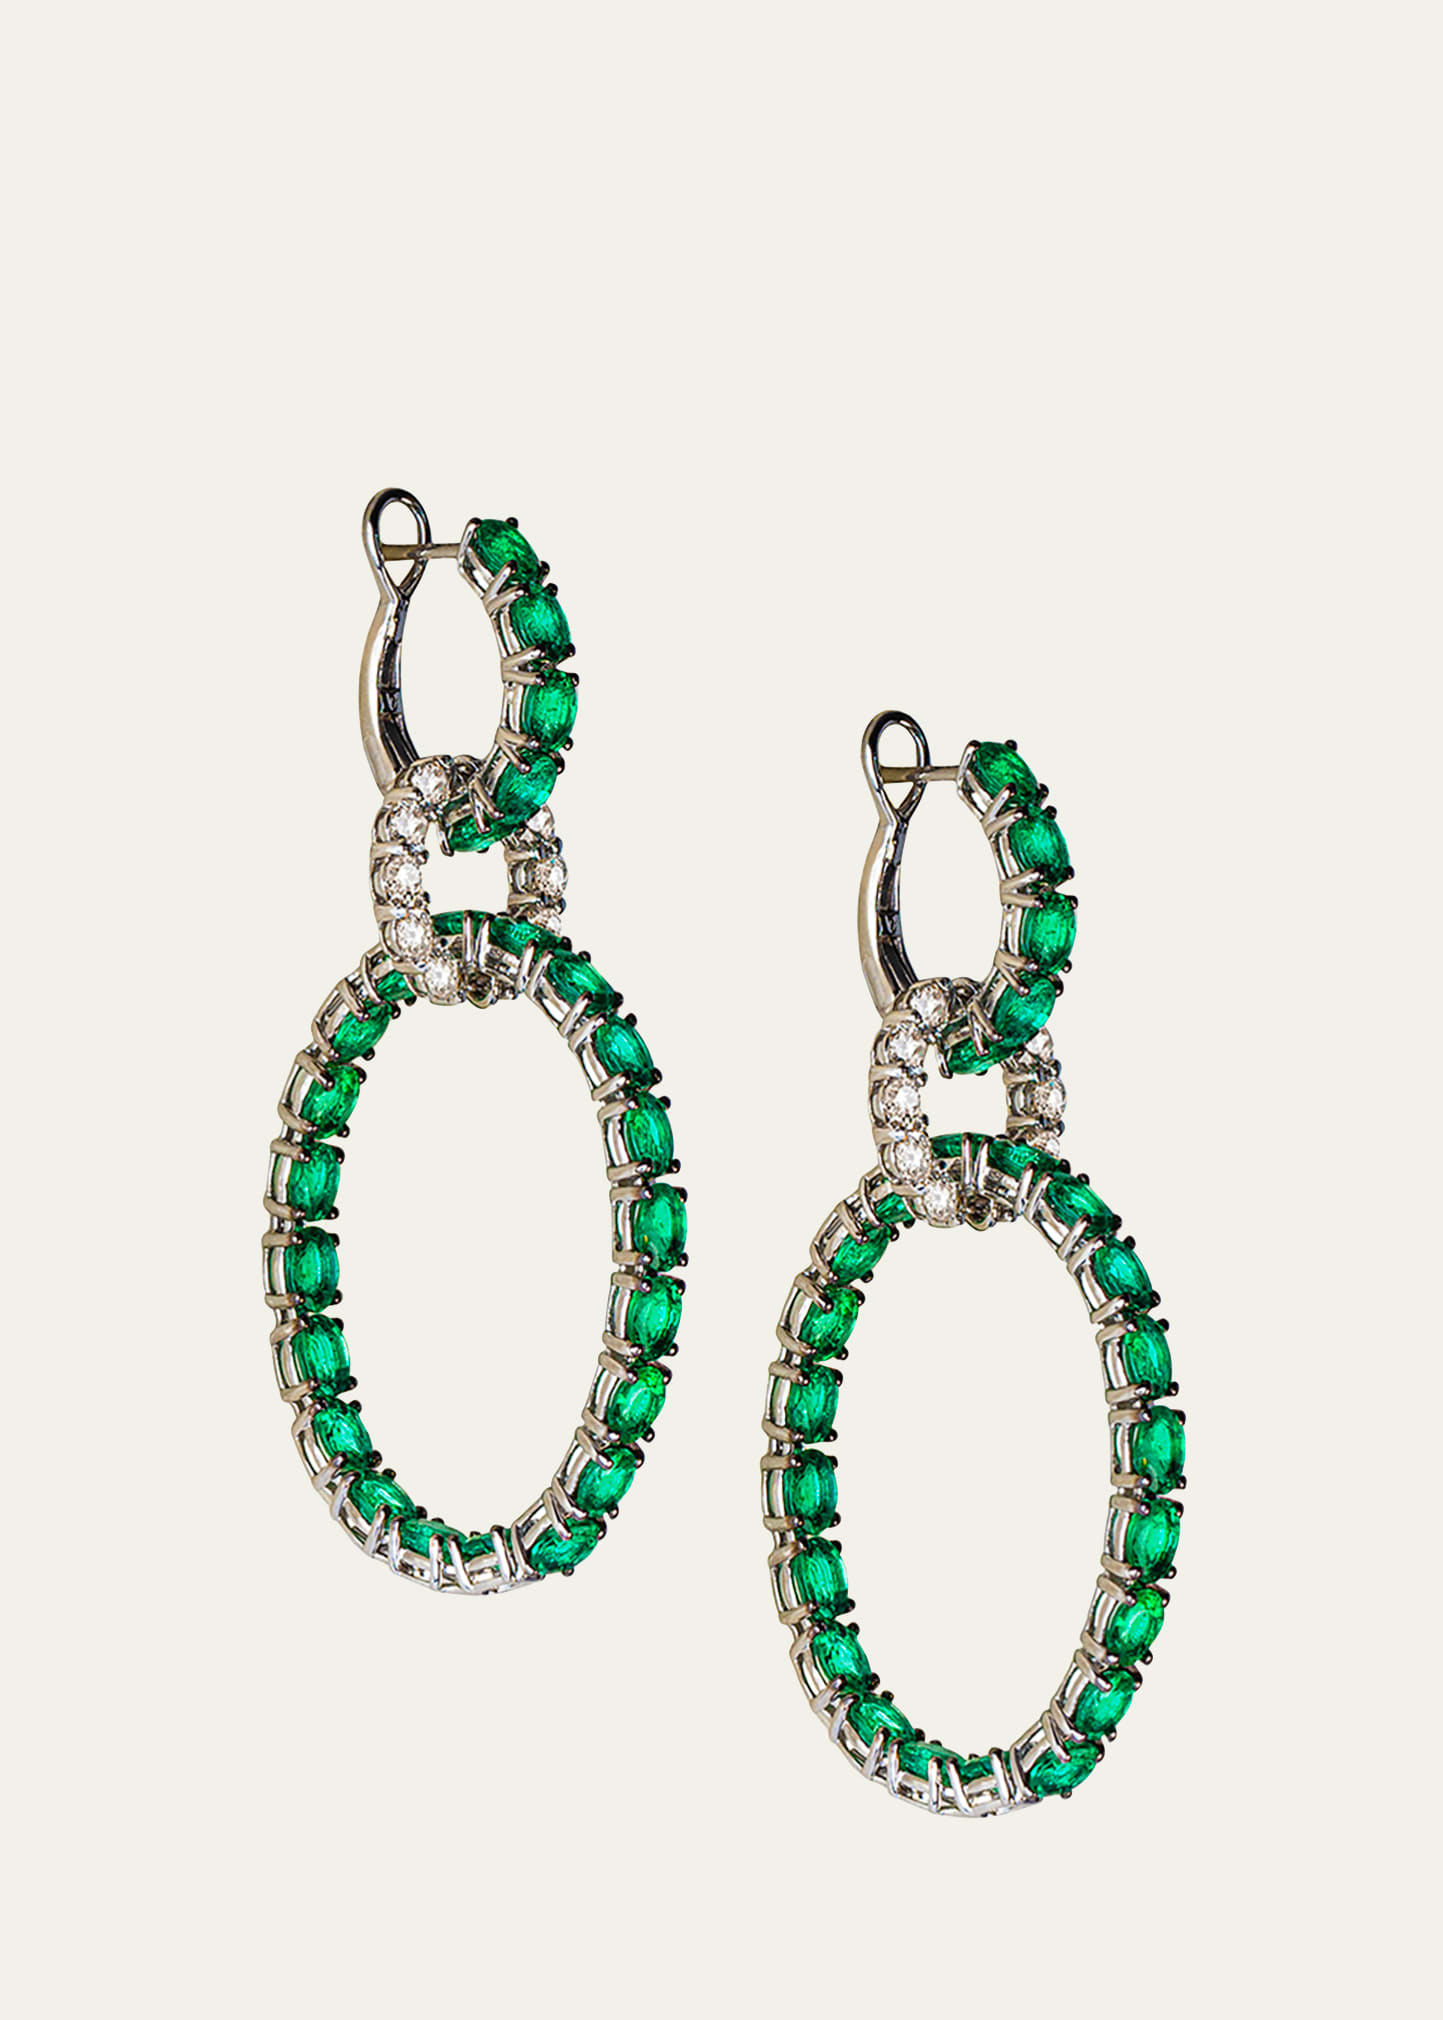 White Gold Diamond and Emerald Earrings from Hoops Collection